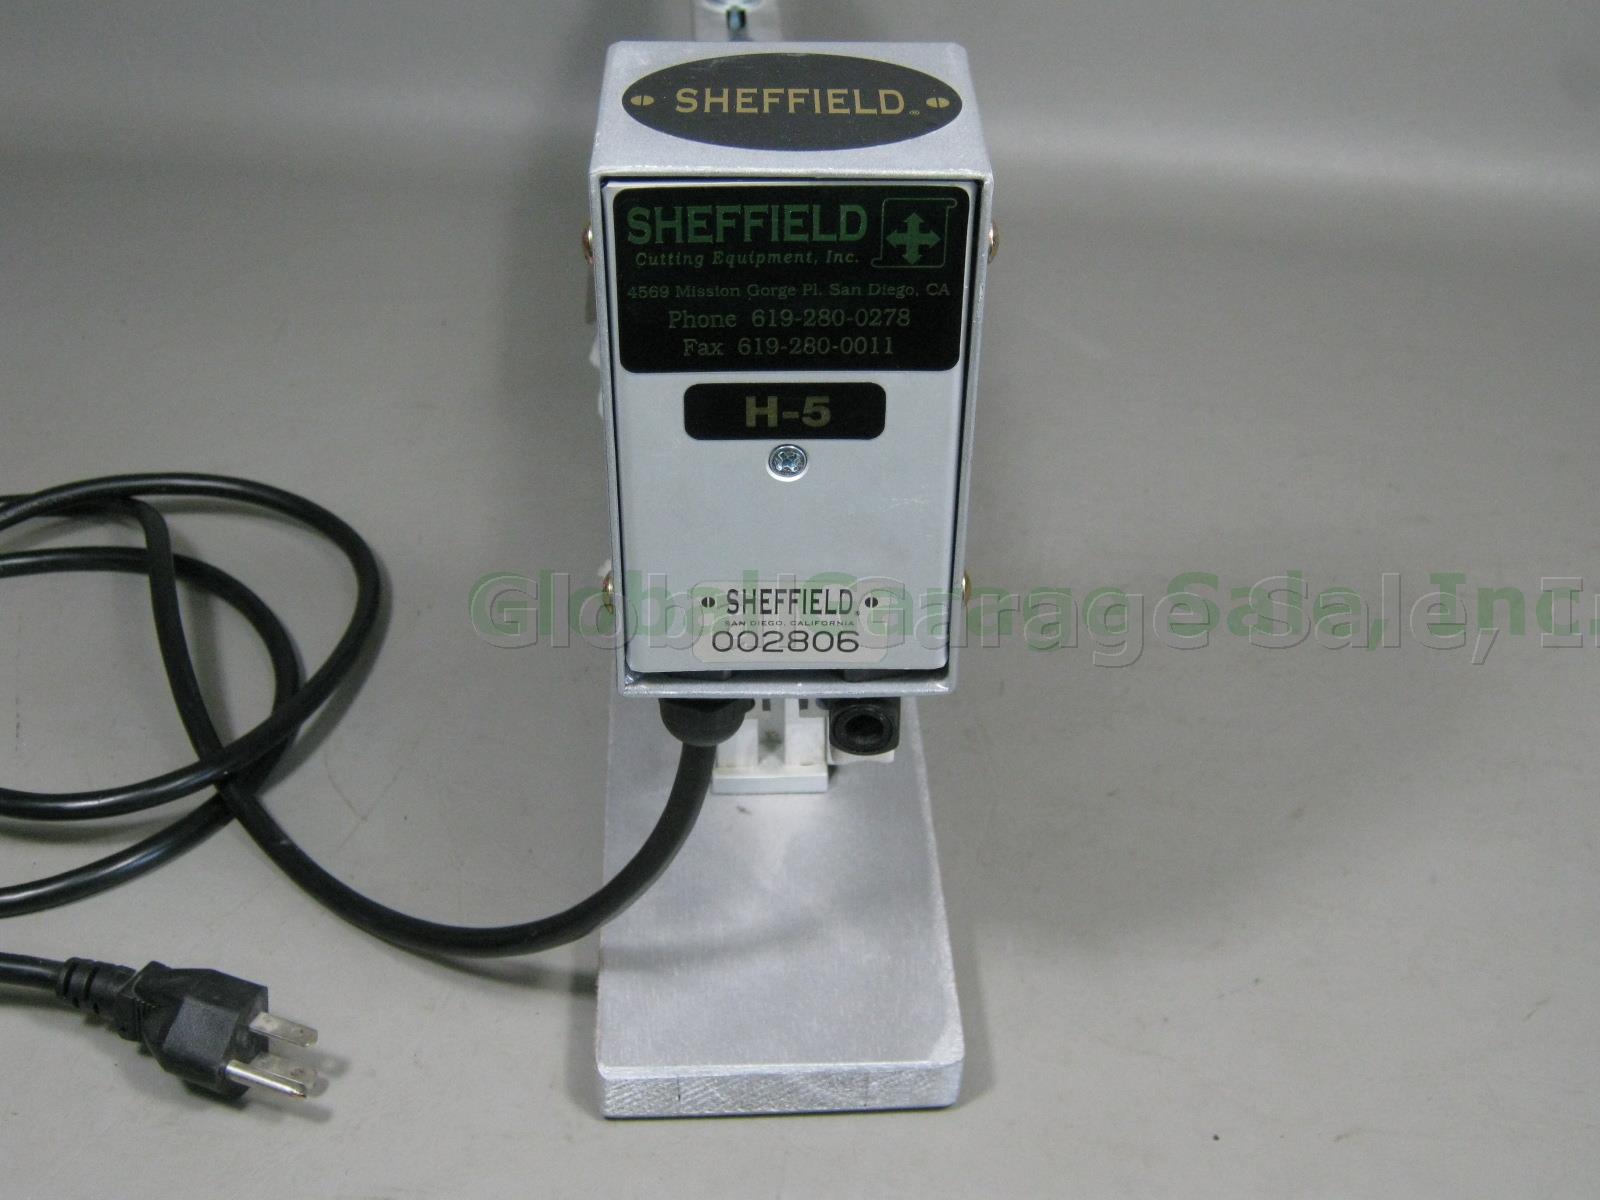 Sheffield H-5 Heavy Duty Manual Production Hot Knife Cutter W/ 4-3/4 Blade NORES 3